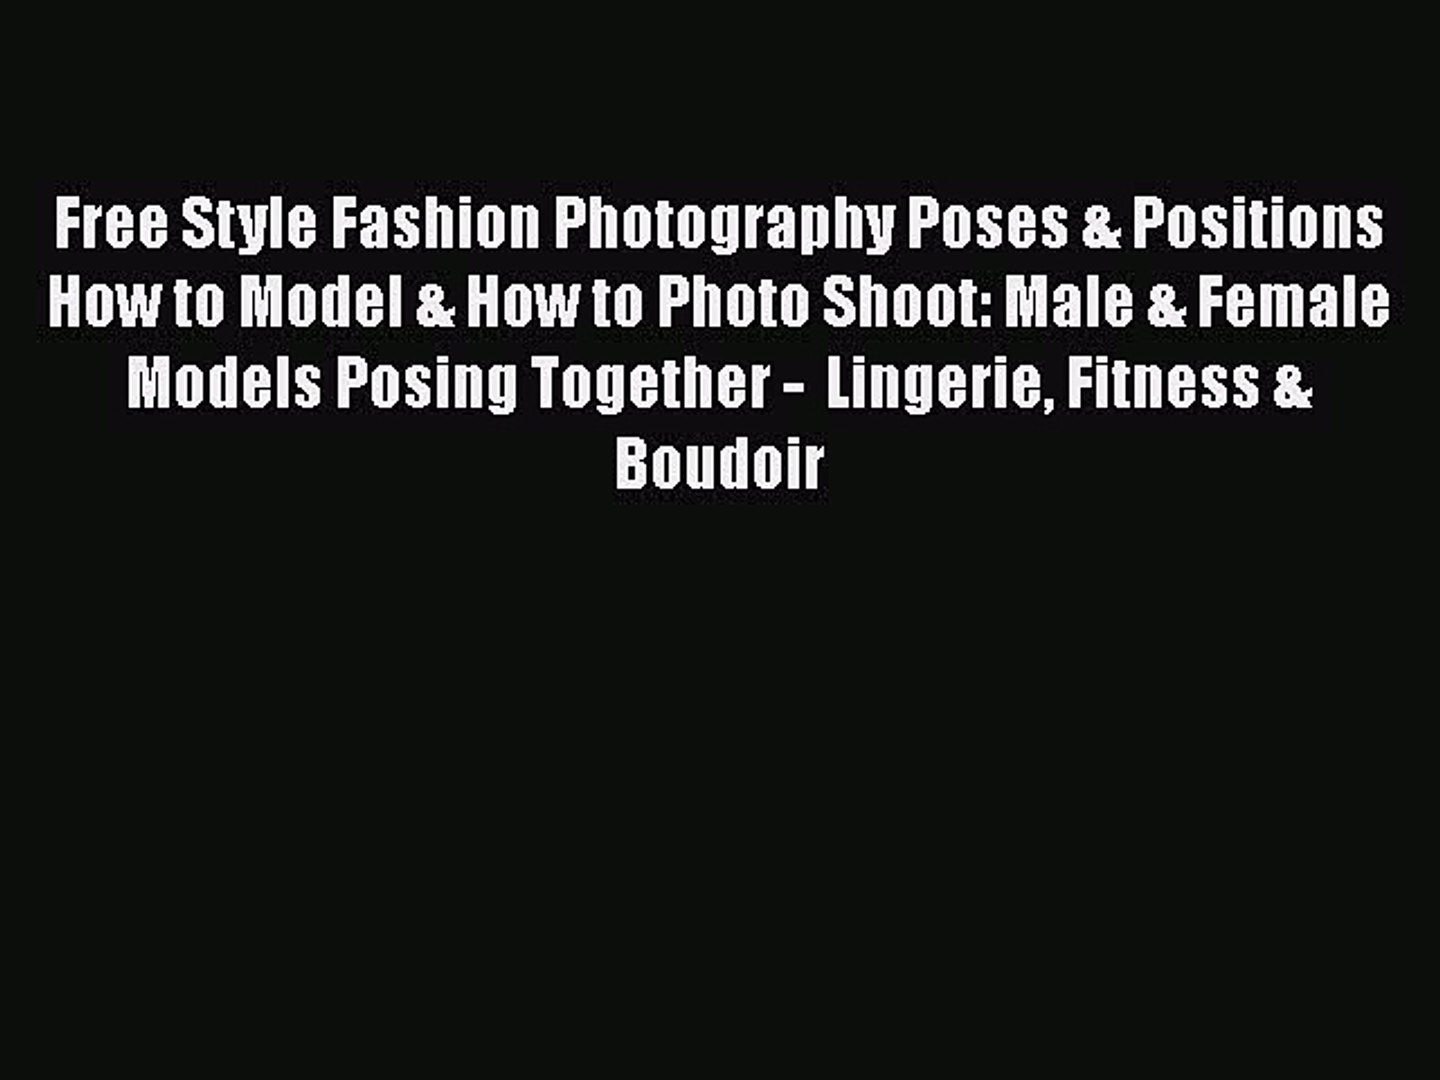 PDF Free Style Fashion Photography Poses & Positions How to Model & How to Photo Shoot: Male